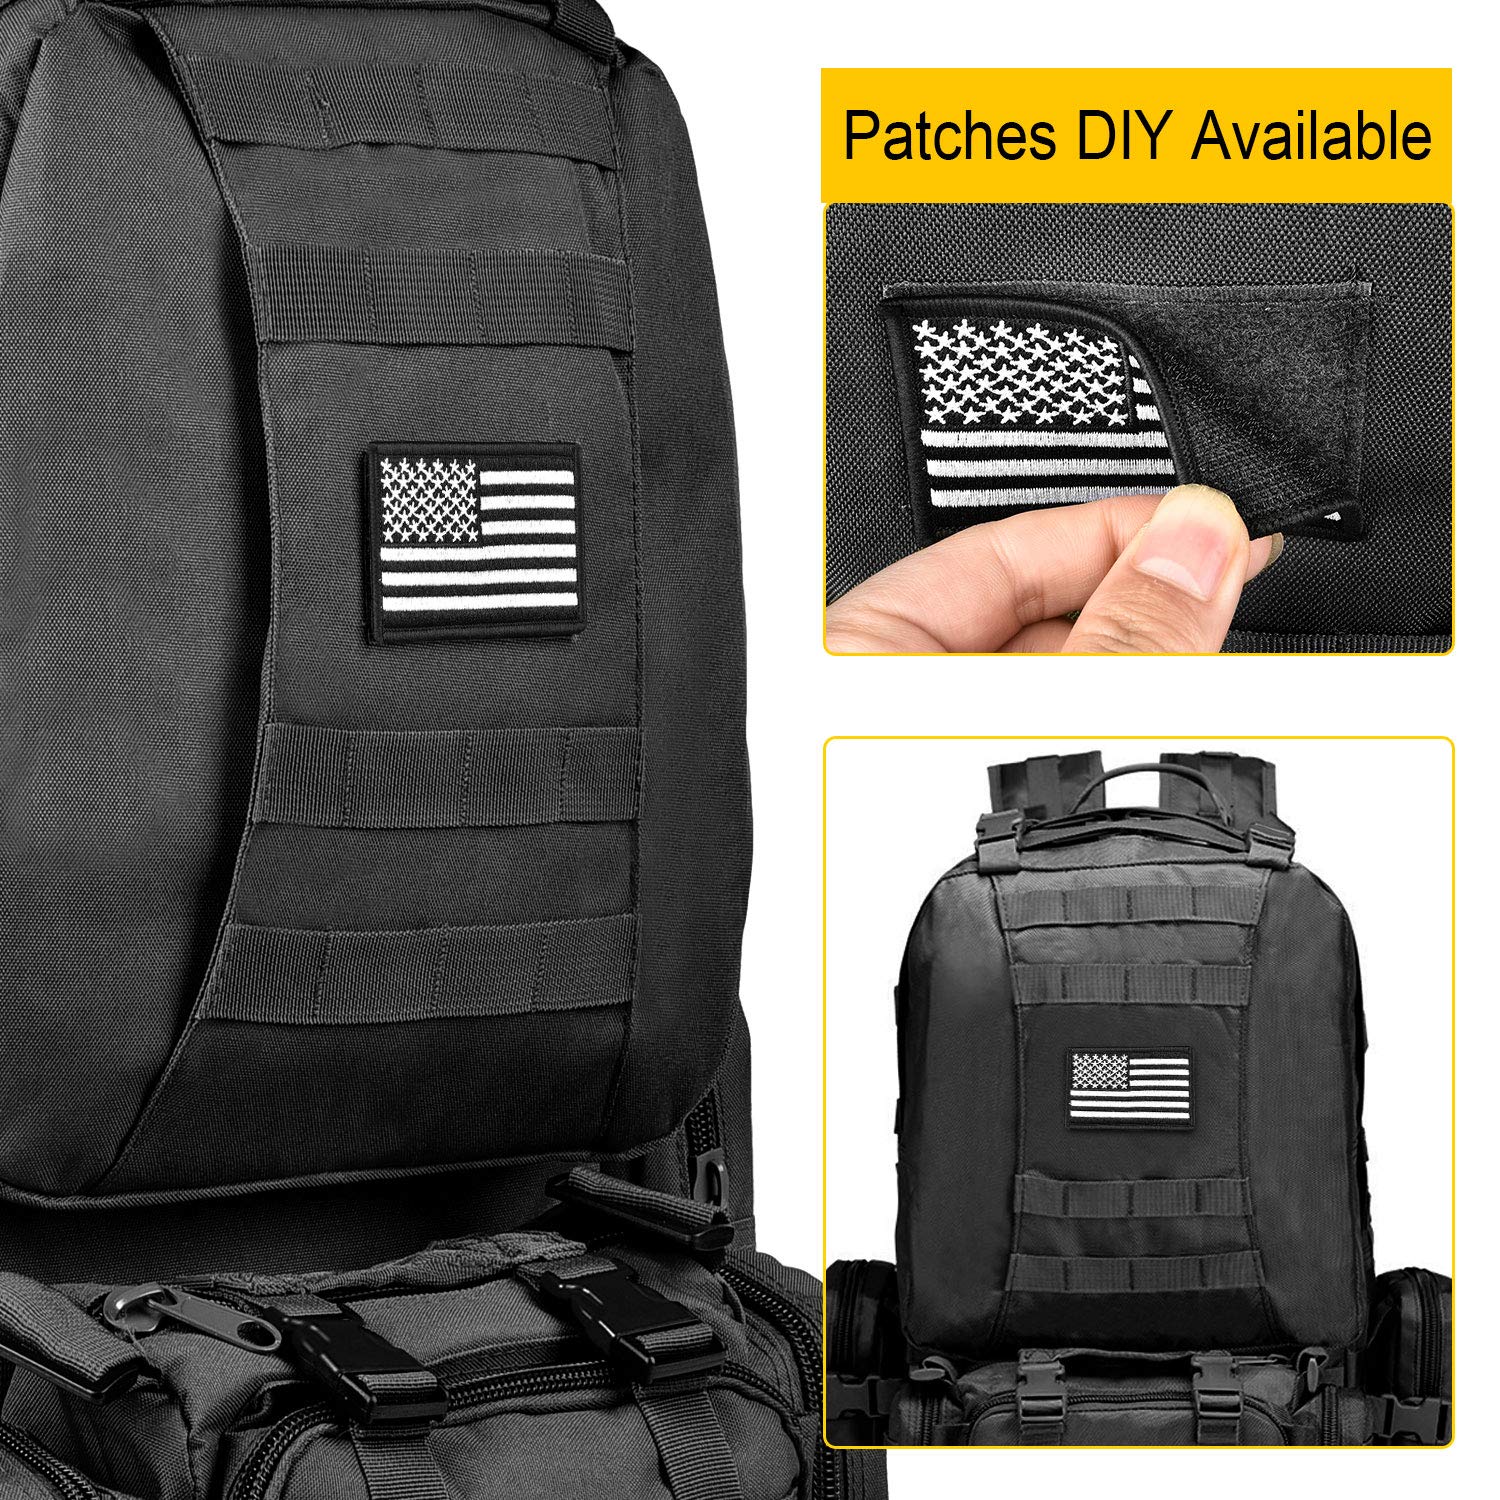 Tour of Duty Outdoor 72 Backpack Military Tactical Backpack